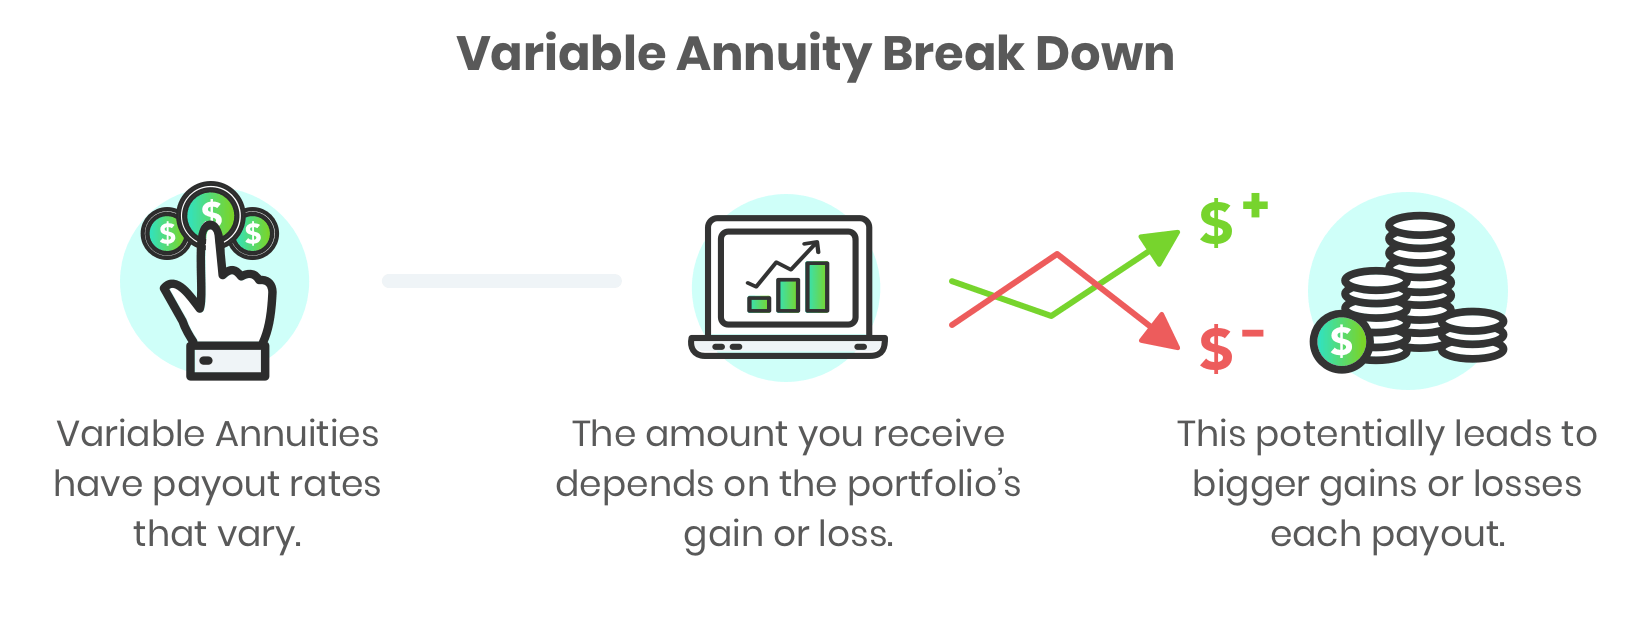 are annuities a good investment